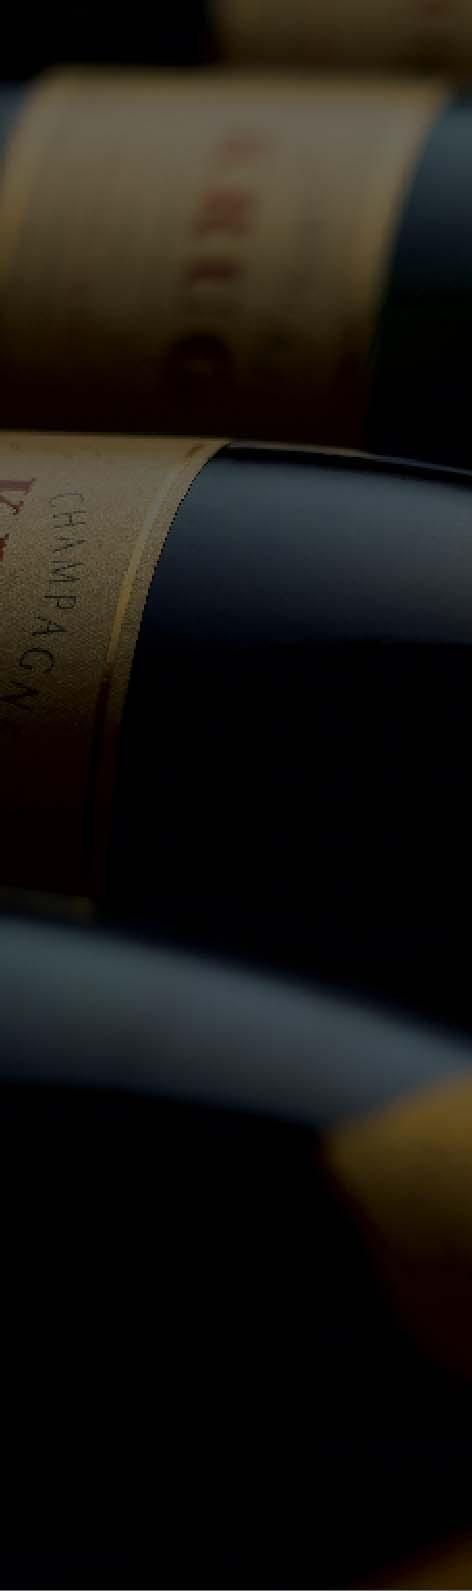 The wines are not released until they have attained the hallmark complexity and distinctive Krug style. Remarkably, a member of the Krug family has blended the wine for every vintage since 1843.